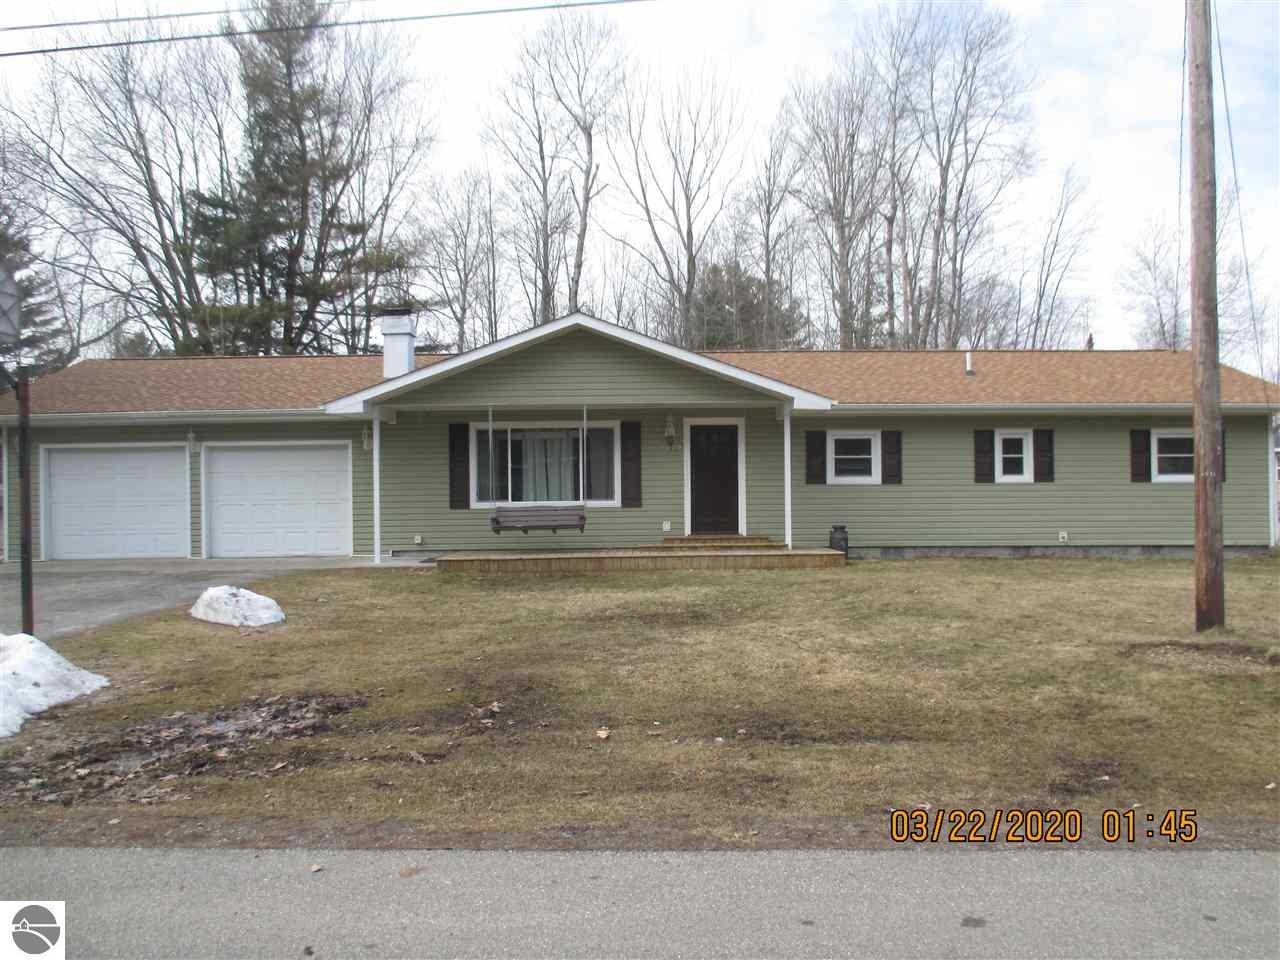 1029 Airport Drive, East Tawas, MI 48730 photo 1 of 36